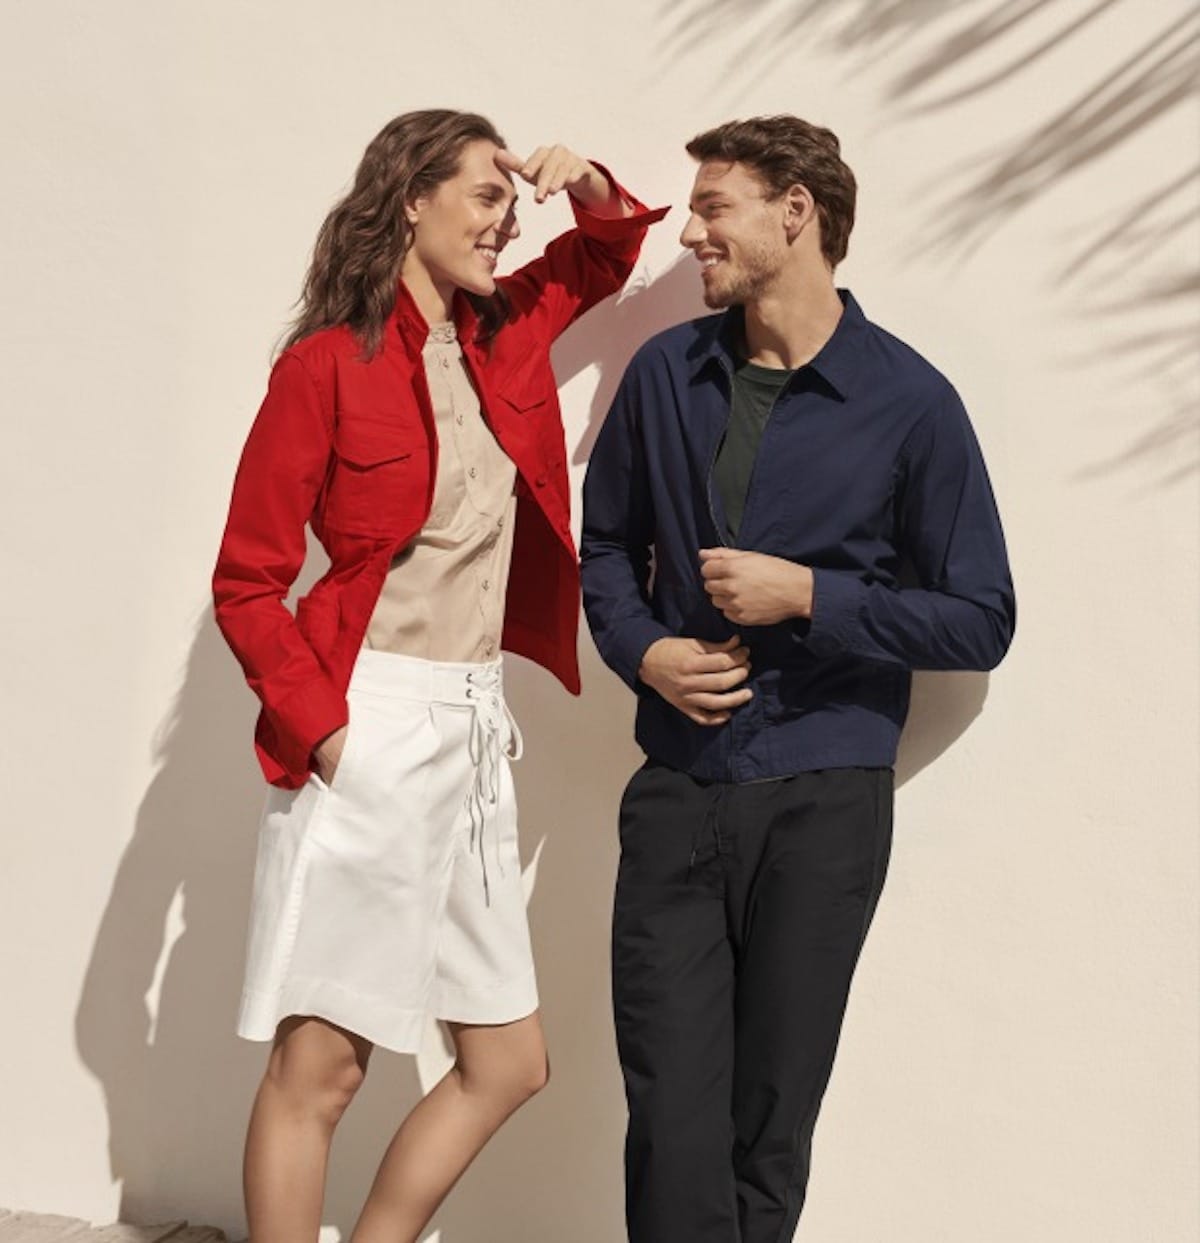 tomas maier and uniqlo